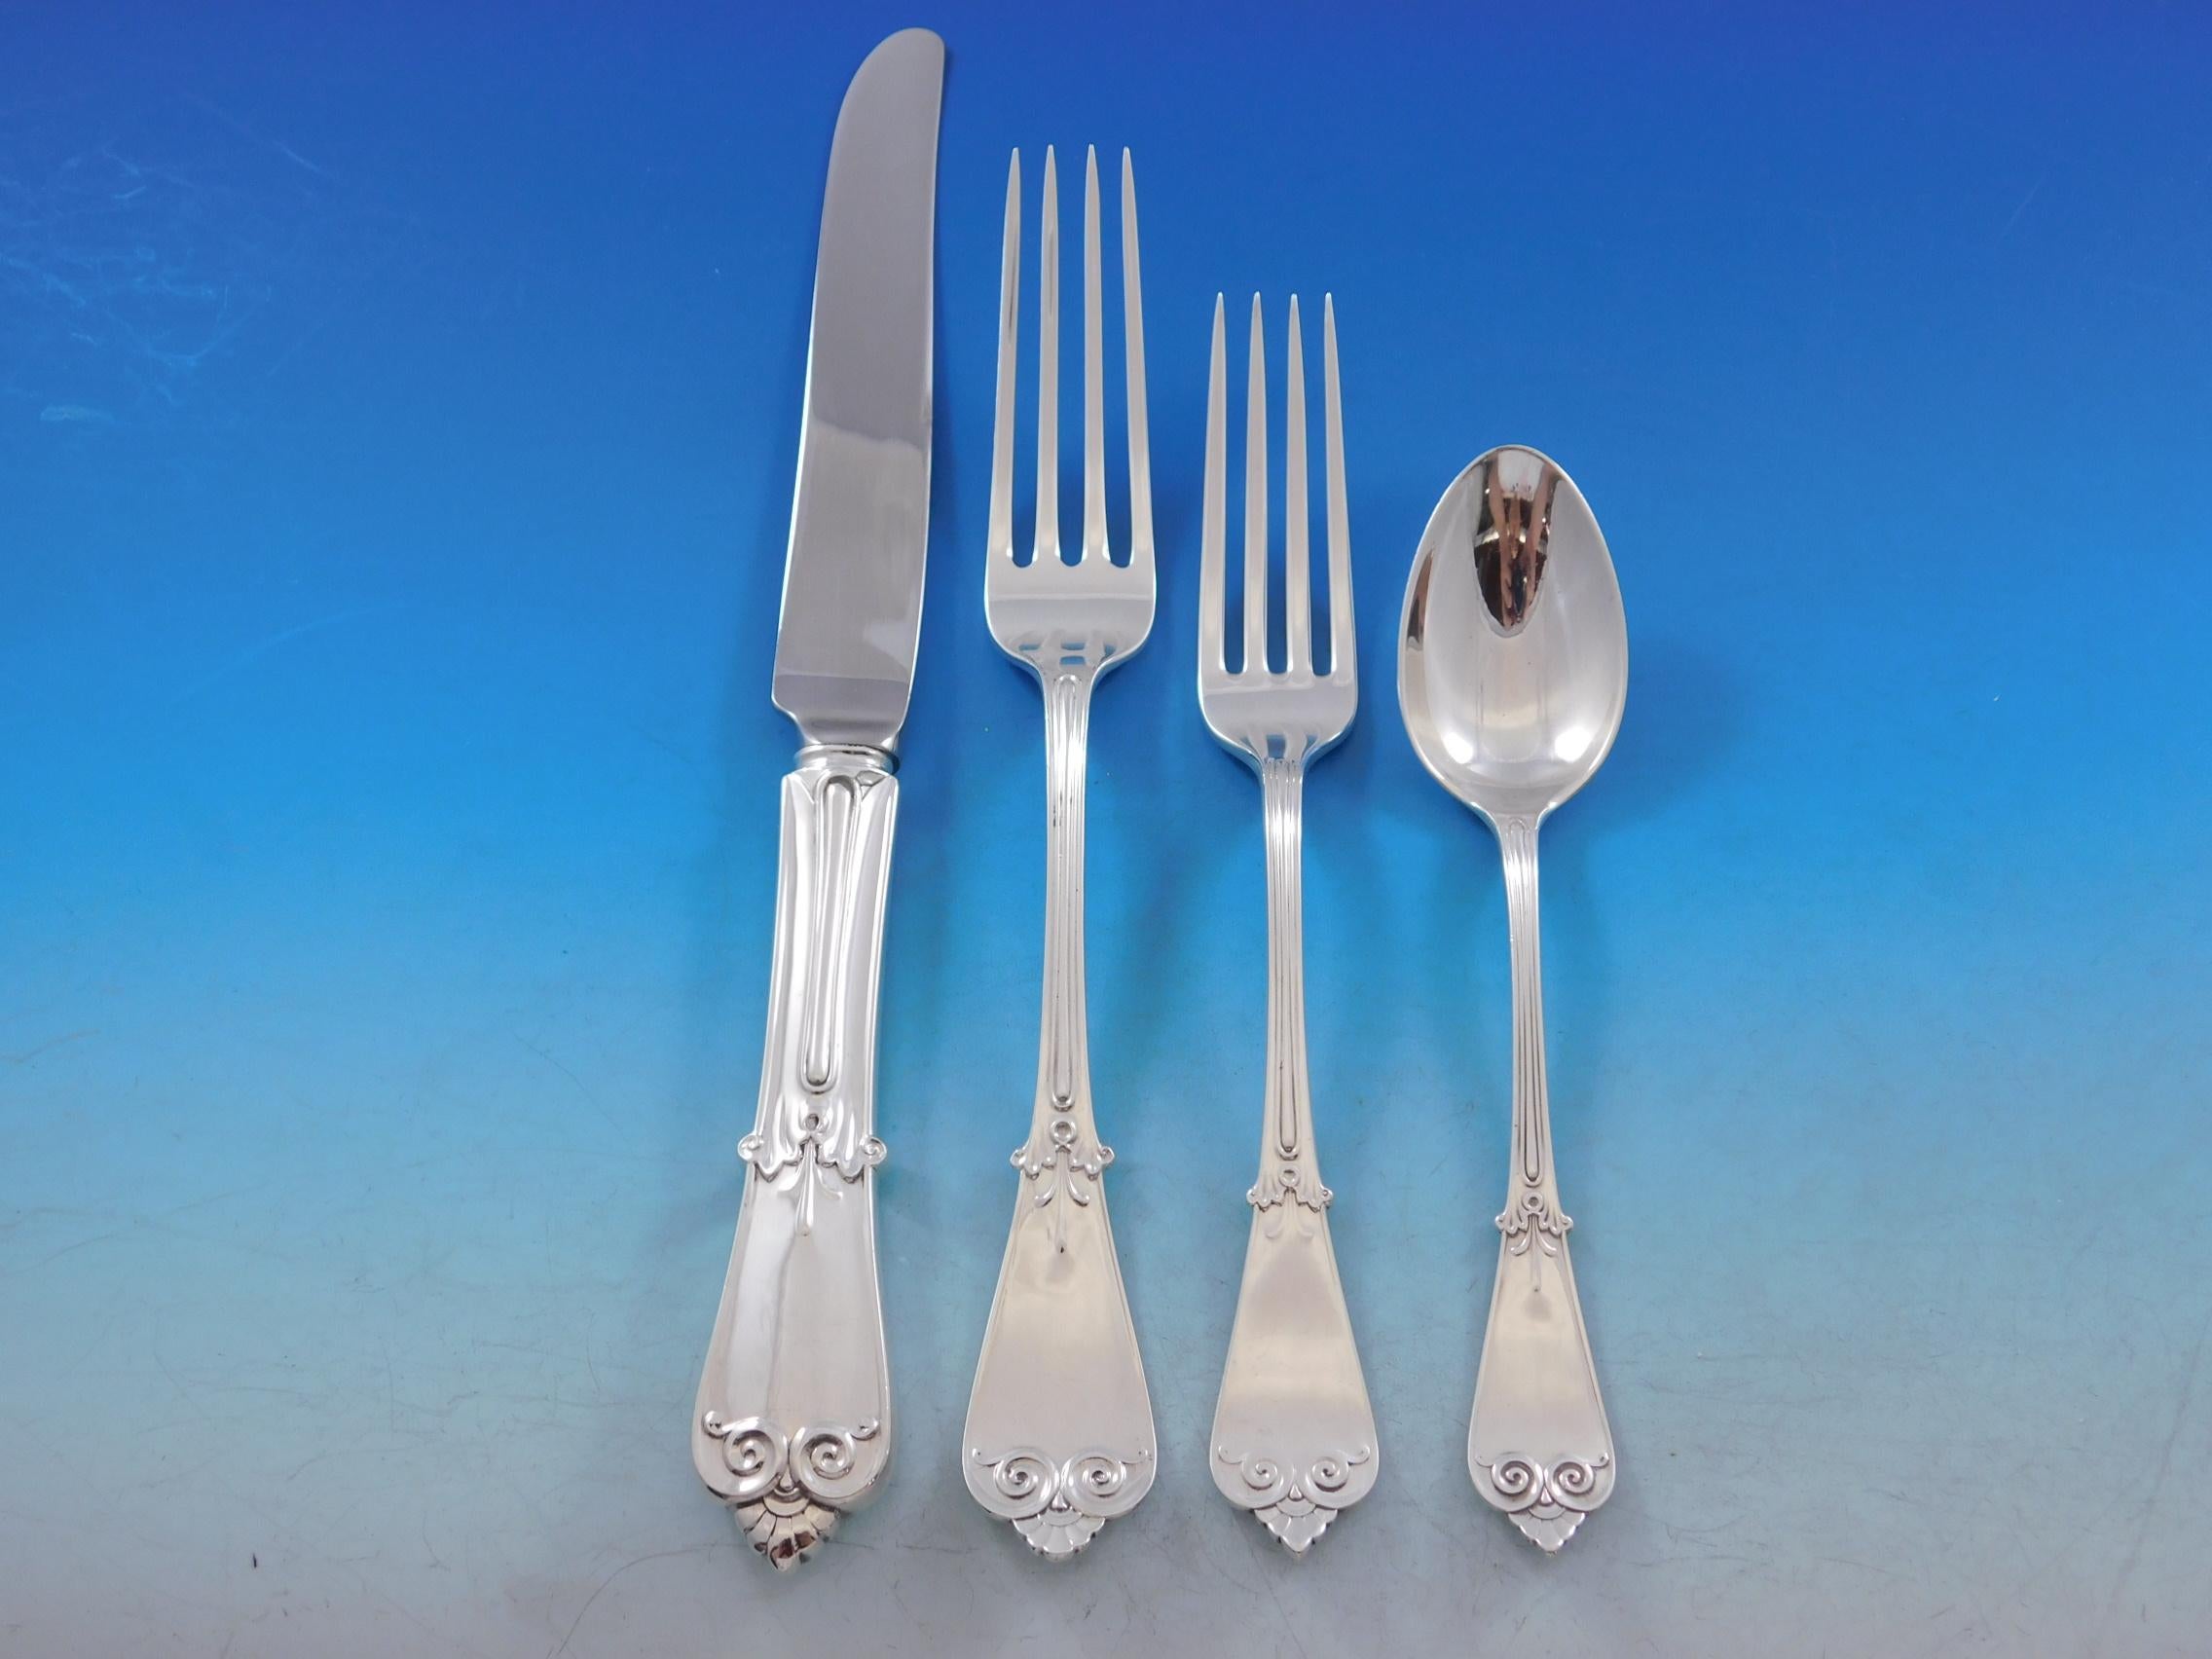 20th Century Beekman by Tiffany Co Sterling Silver Flatware Set for 12 Service 61 Pcs Dinner